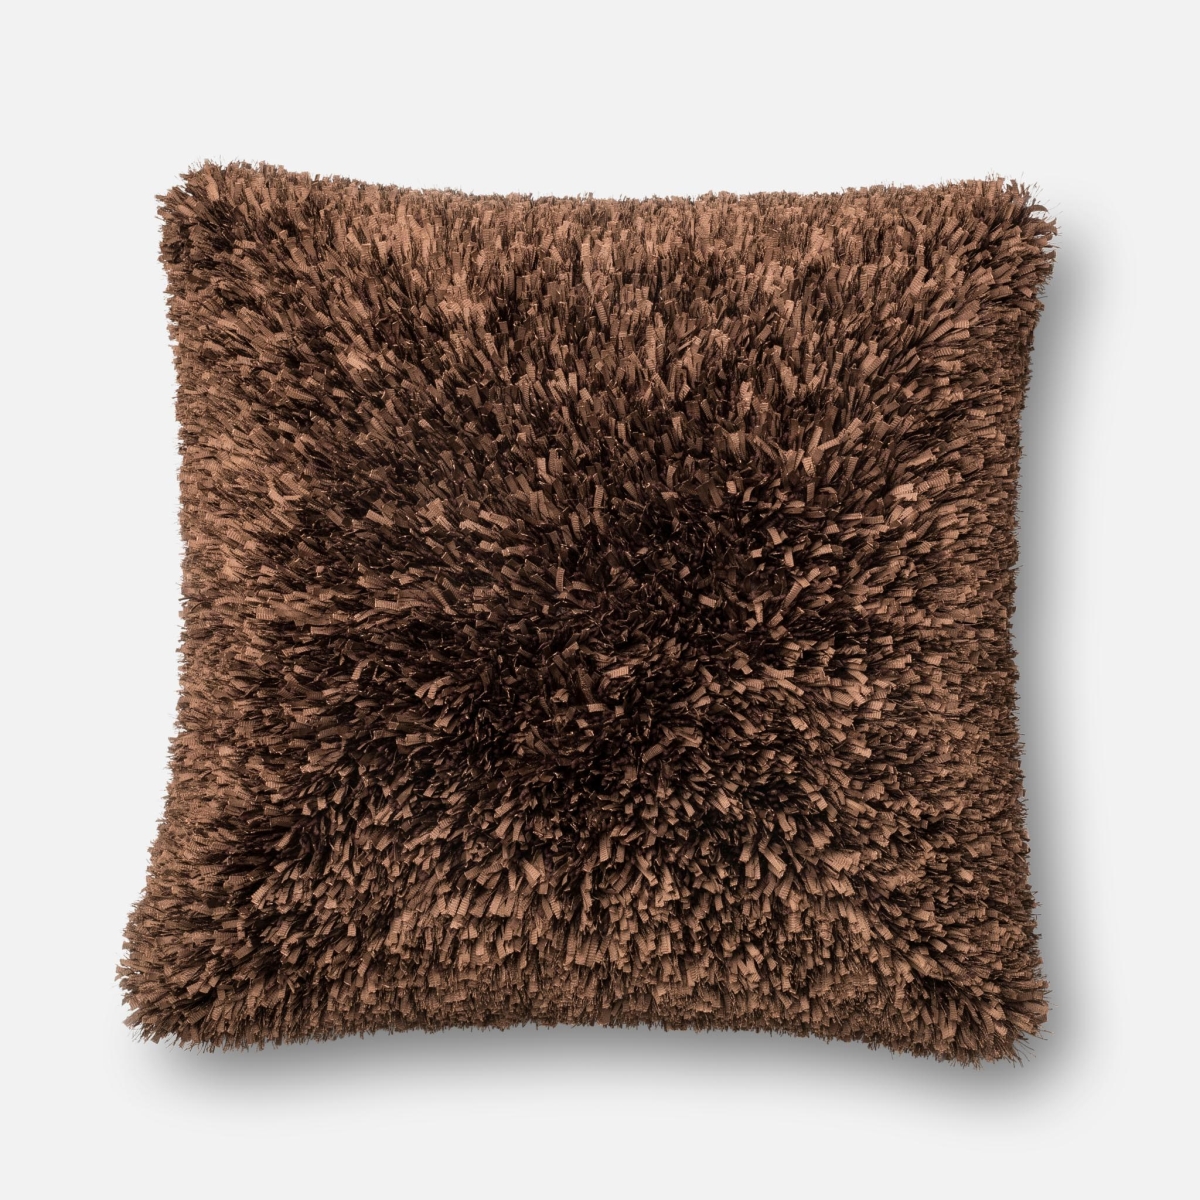 Dsetp0045br00pil3 22 X 22 In. Contemporary Down Insert Decorative Pillow - Brown